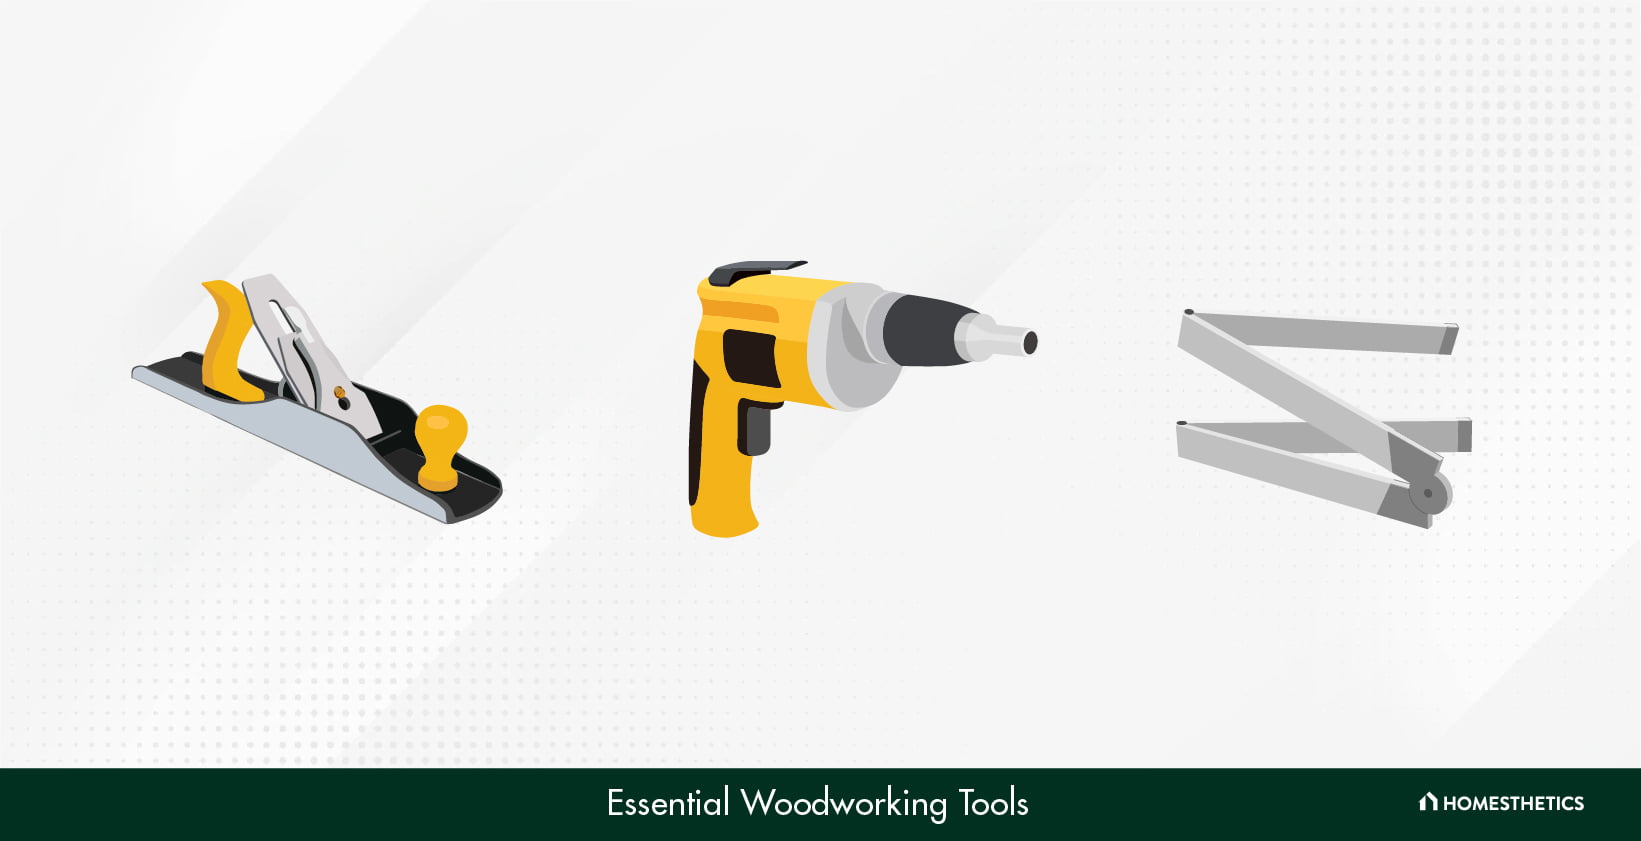 35 Essential Woodworking Tools – Must-Have Basic Woodworking Tools